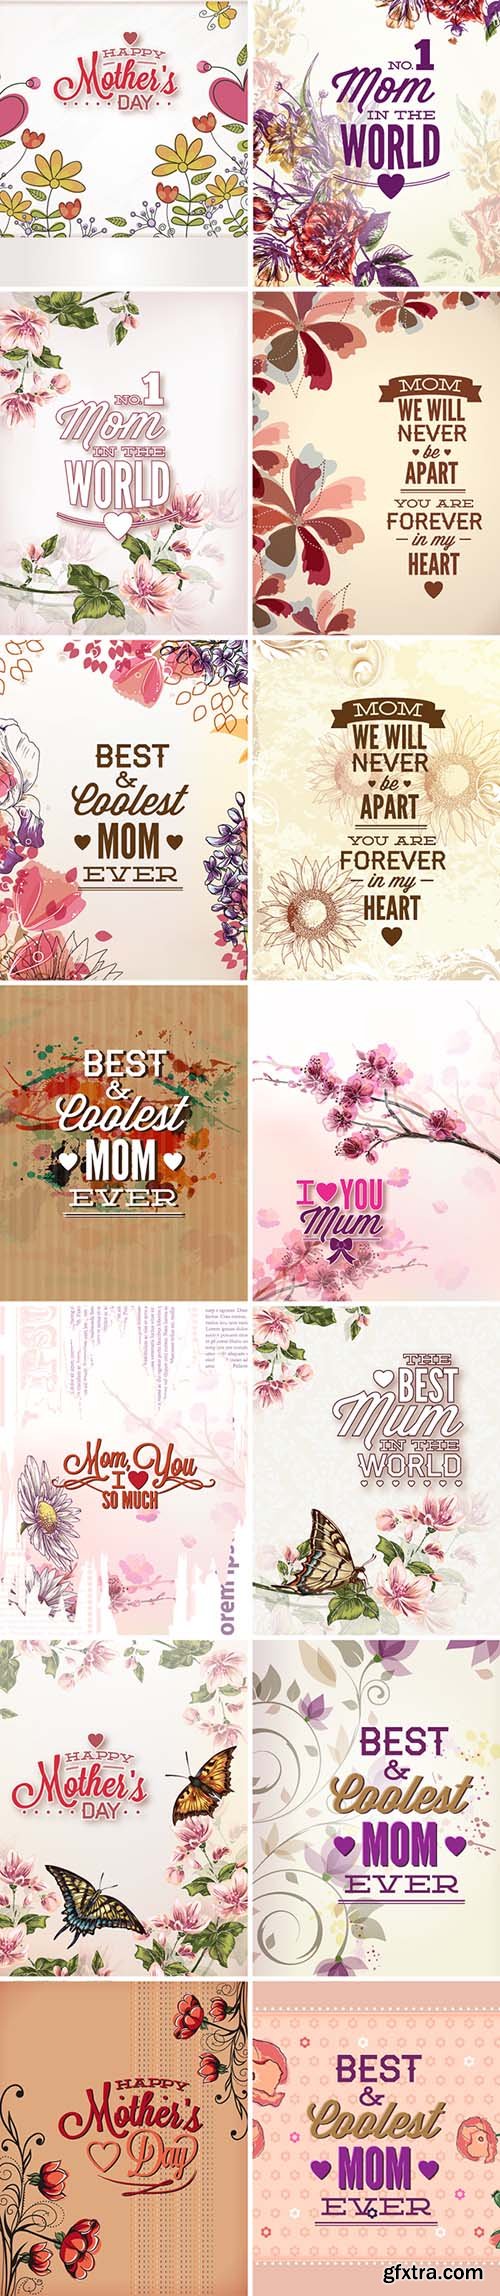 30 Mothers Day 2014 Vector Collection 11